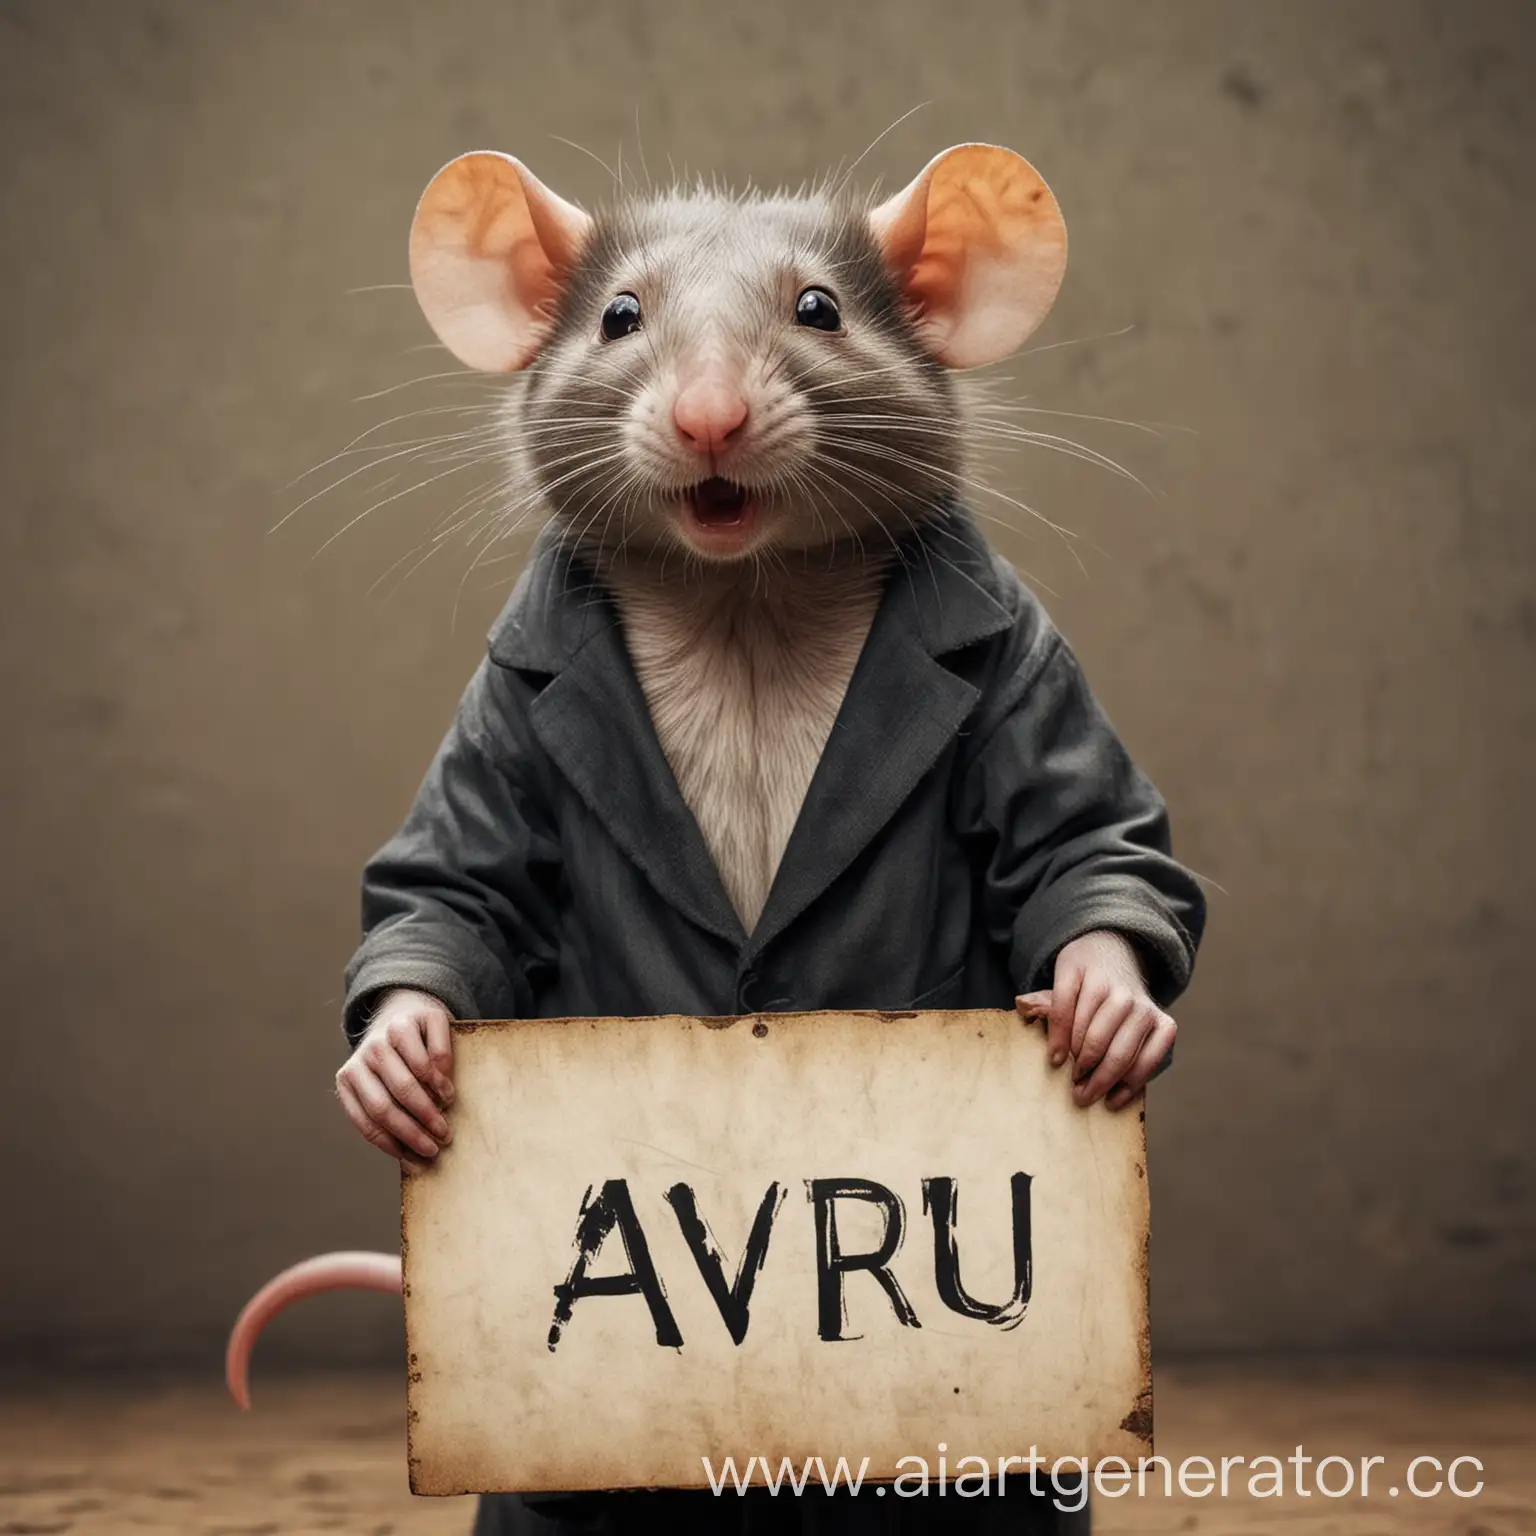 Clever-and-Confident-Rat-Holding-Avru-Sign